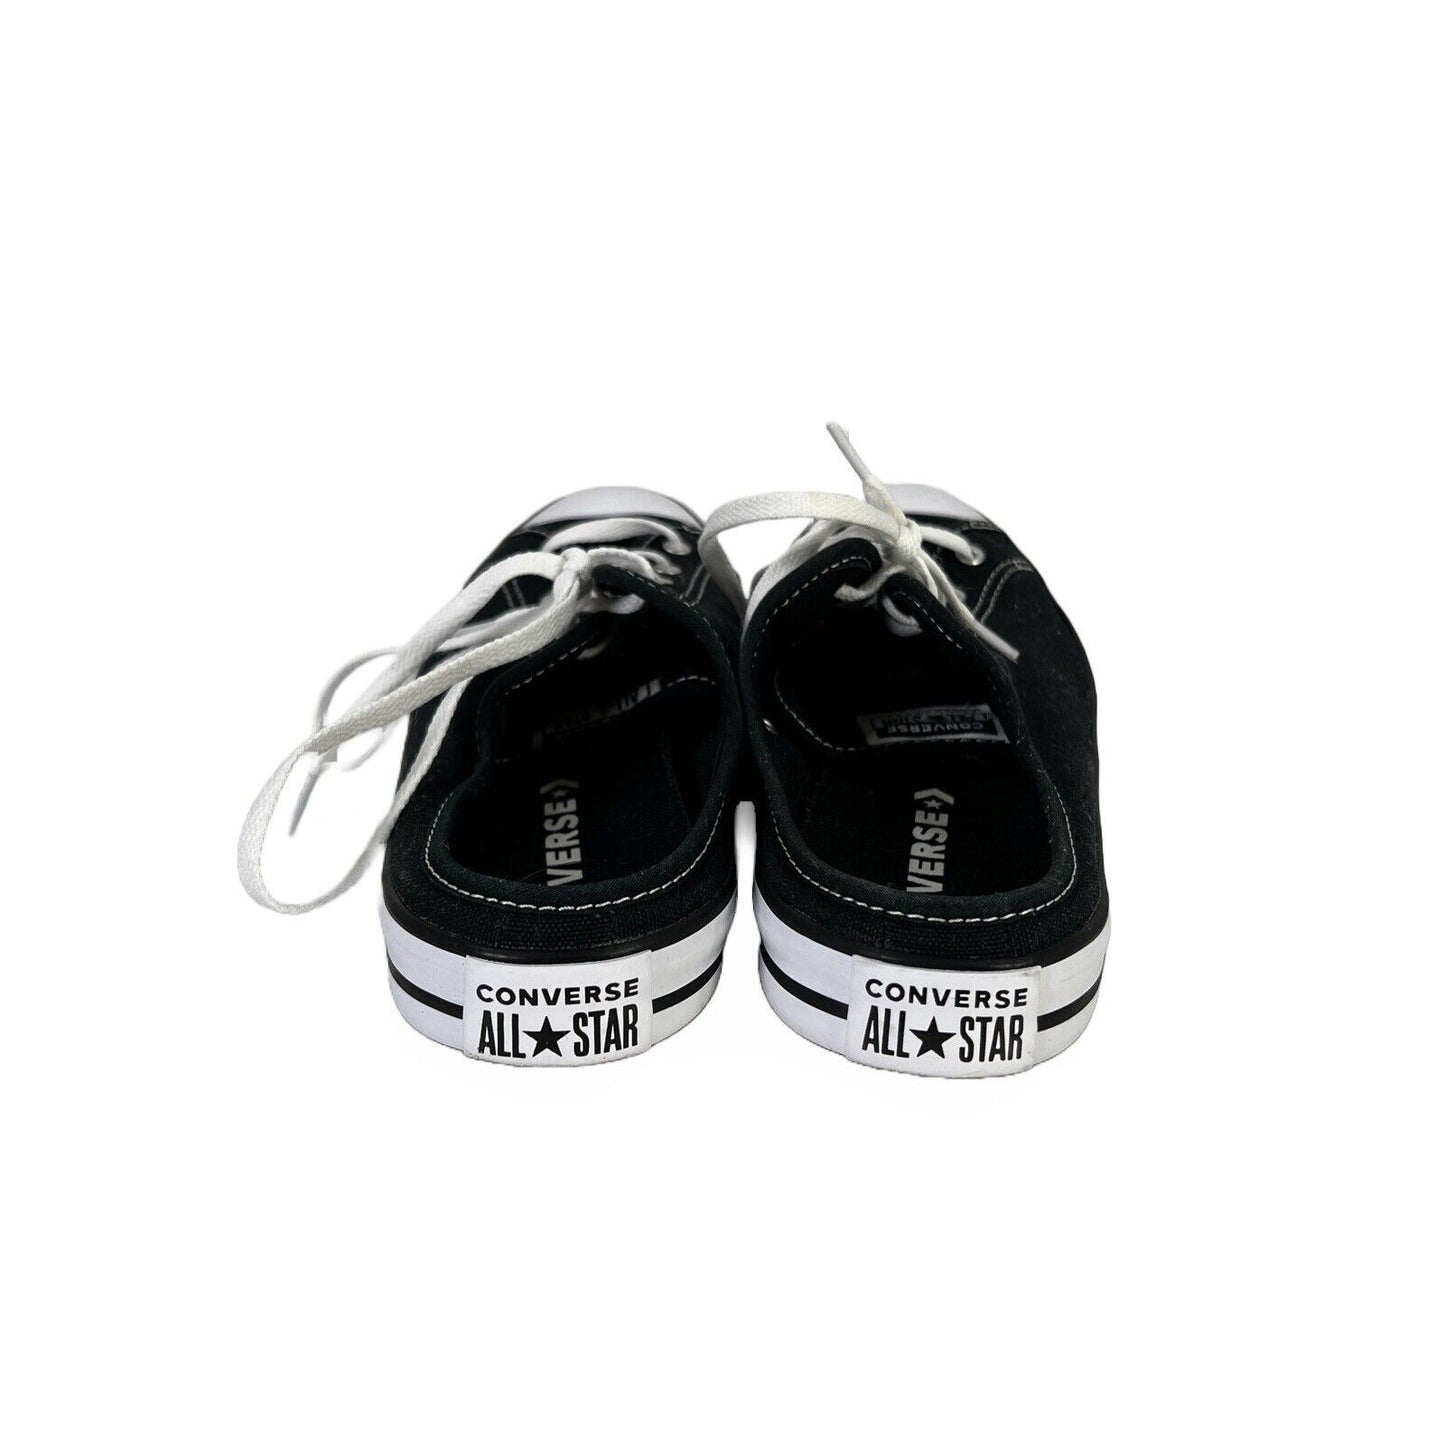 Converse Women's Black Canvas Lace Up Slip On Casual Shoes - 8